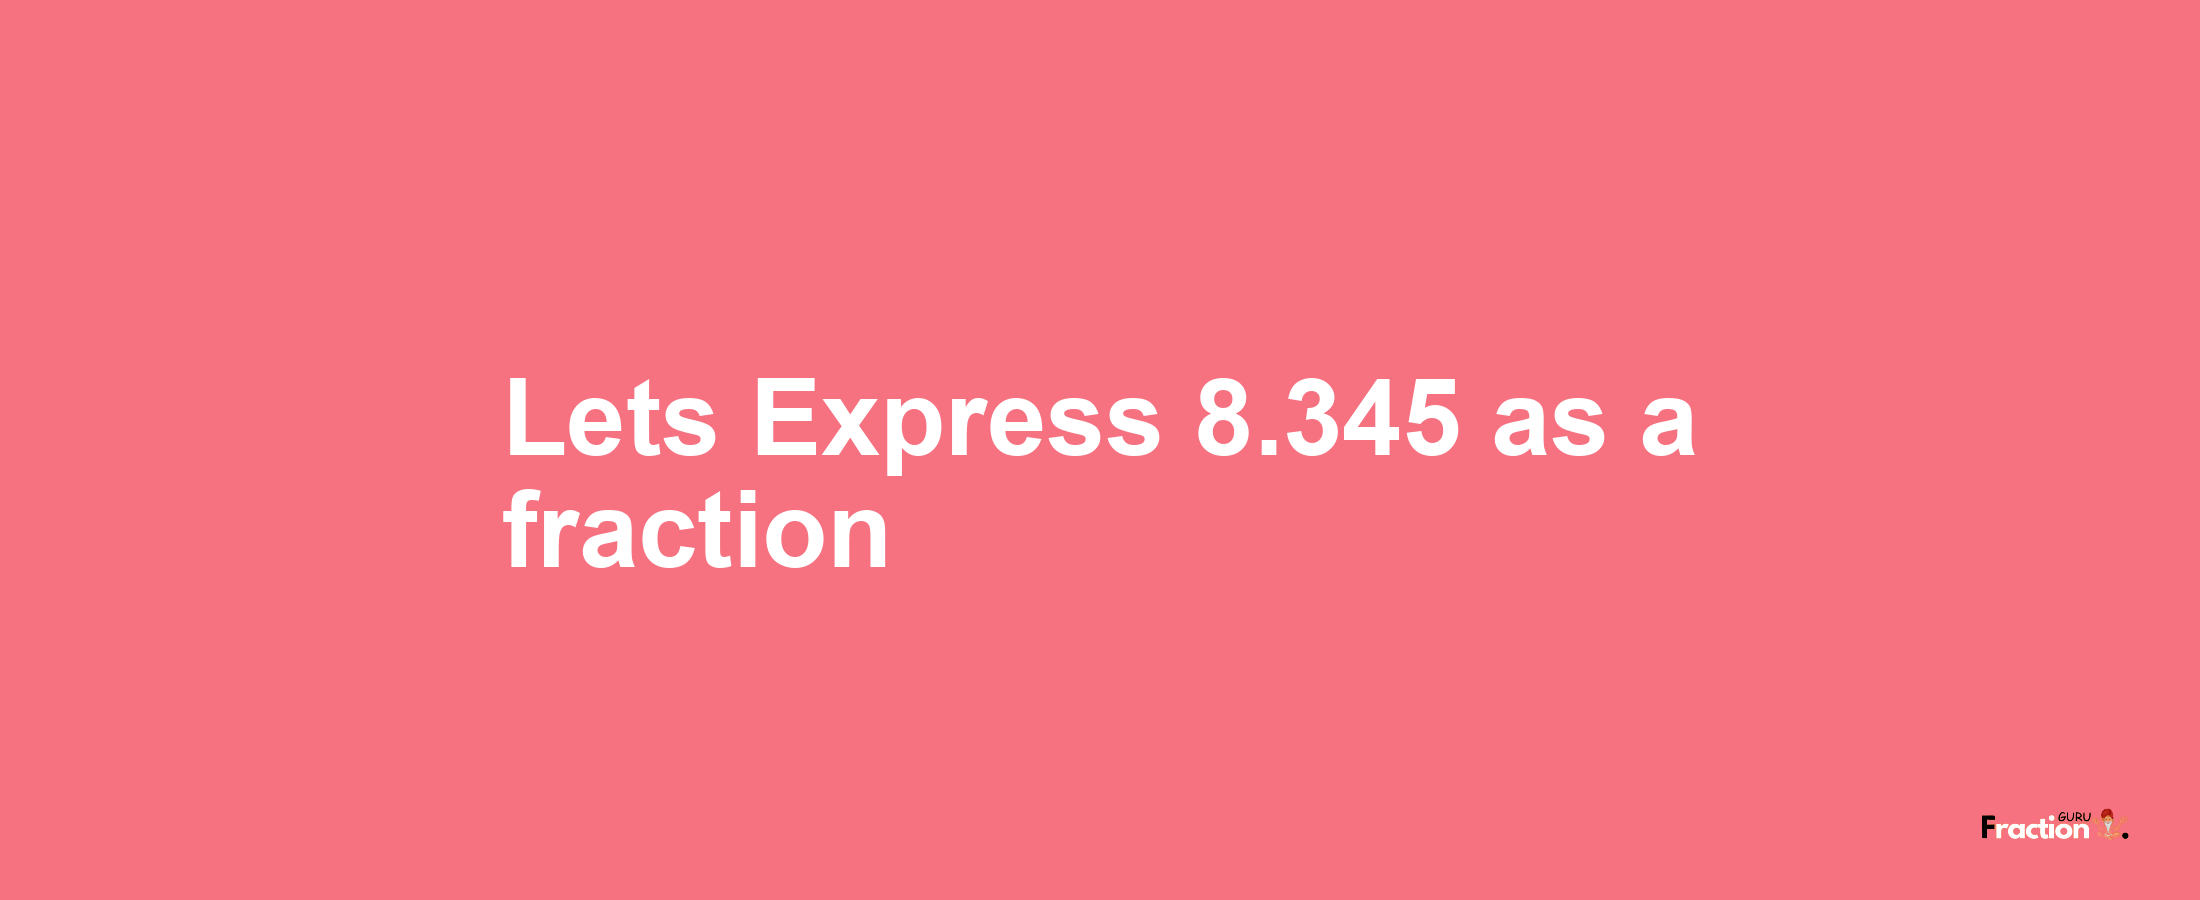 Lets Express 8.345 as afraction